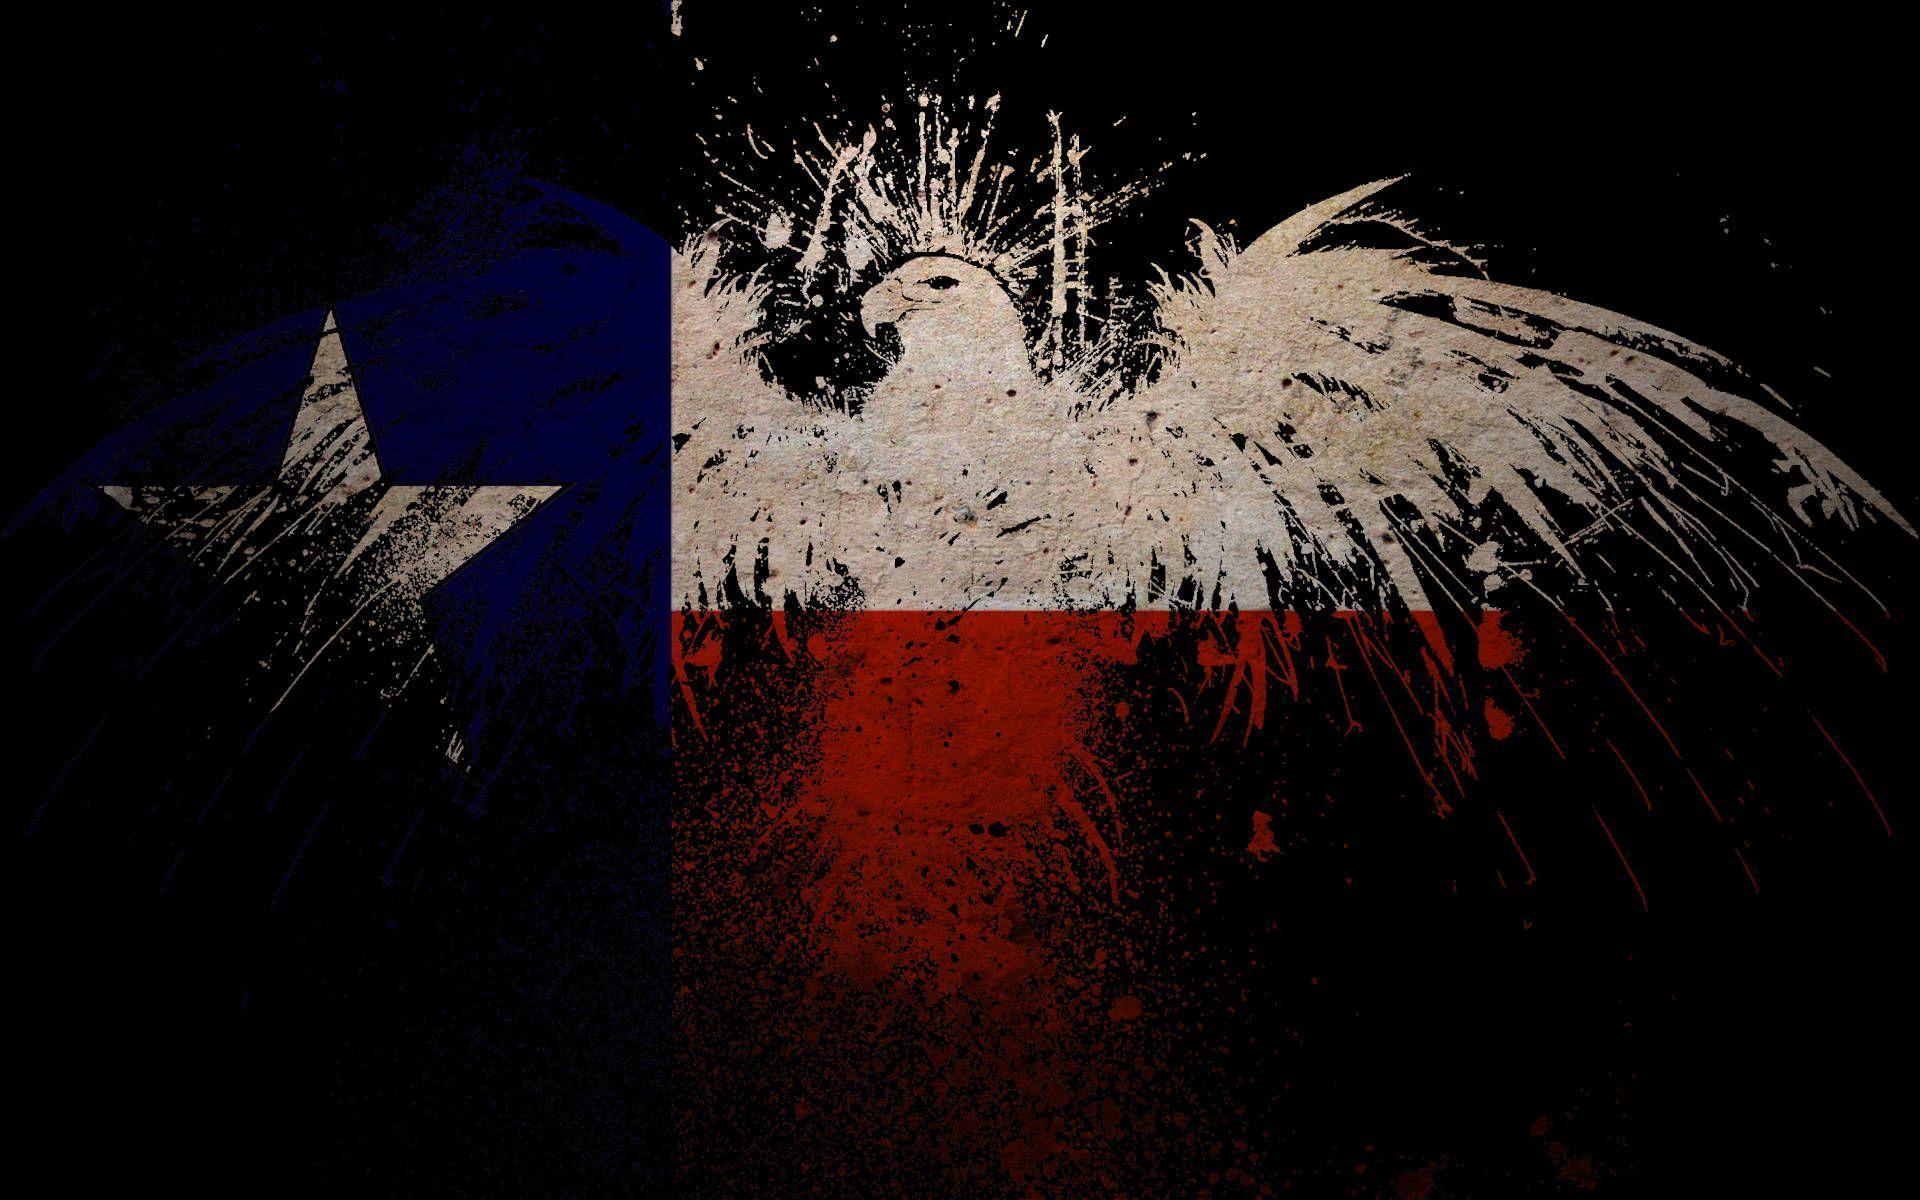 Free Texas Flag Wallpaper, HDQ Texas Flag Image Collection for